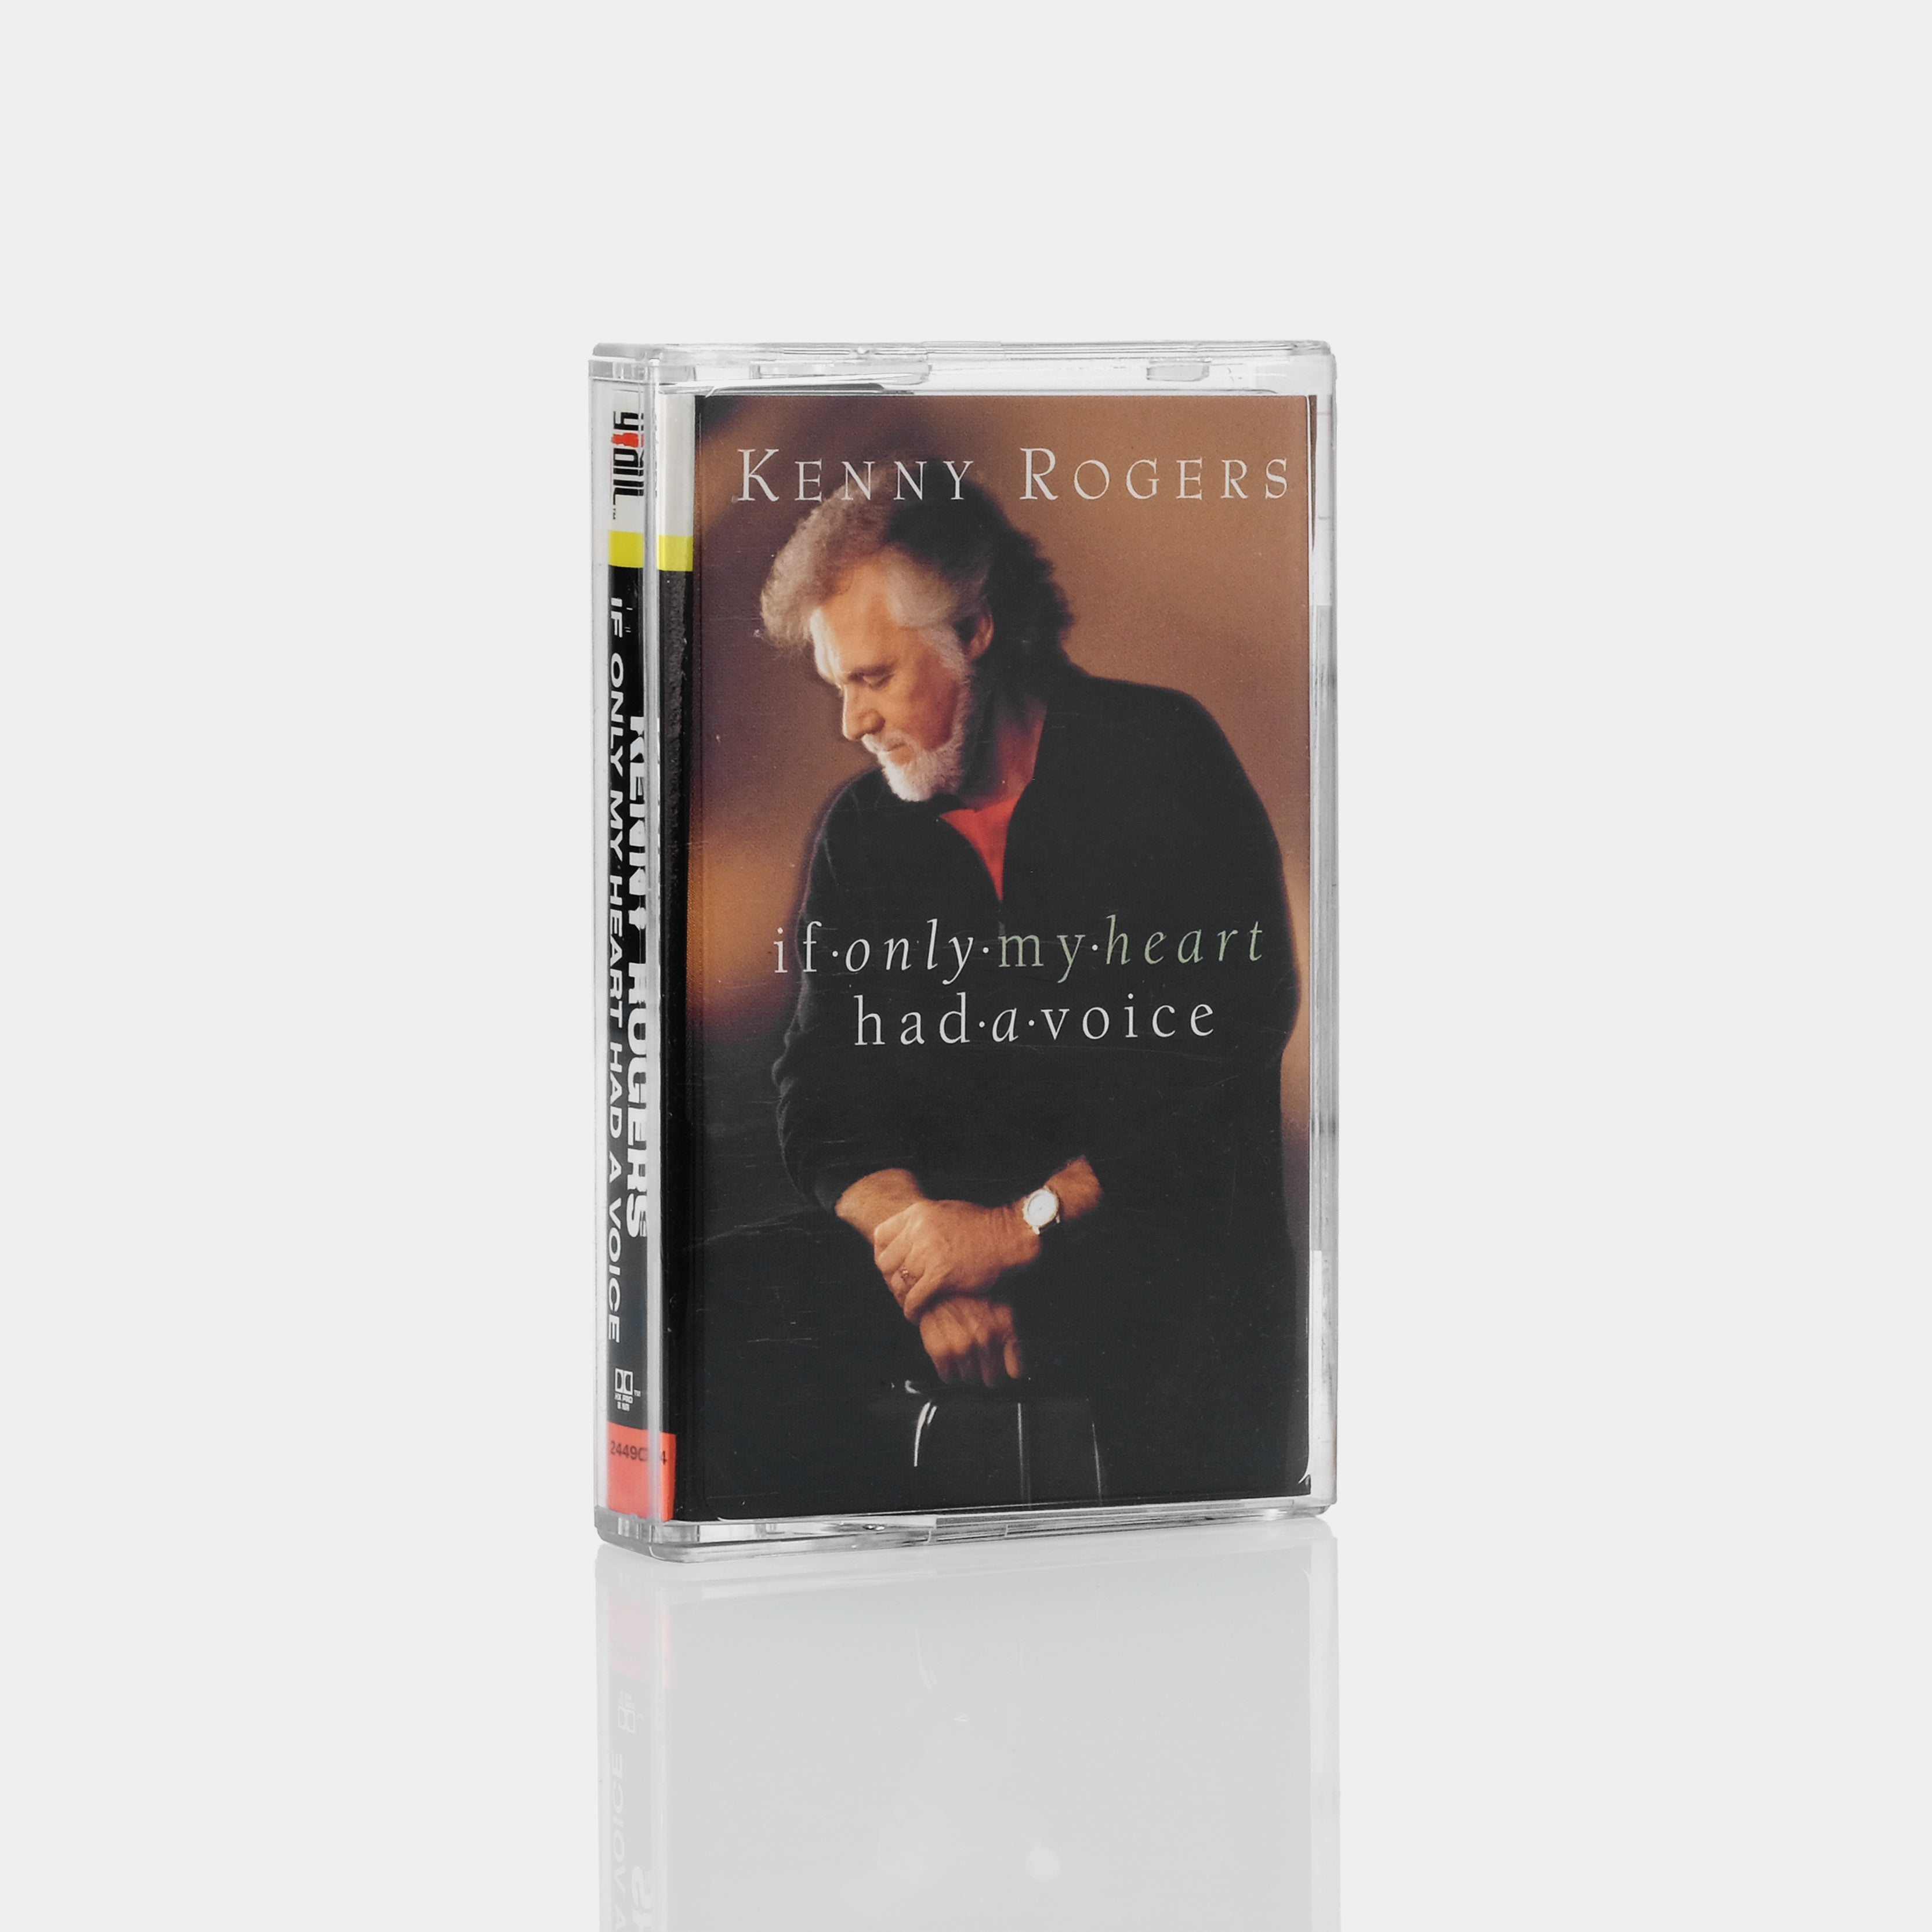 Kenny Rogers - If Only My Heart Had A Voice Cassette Tape